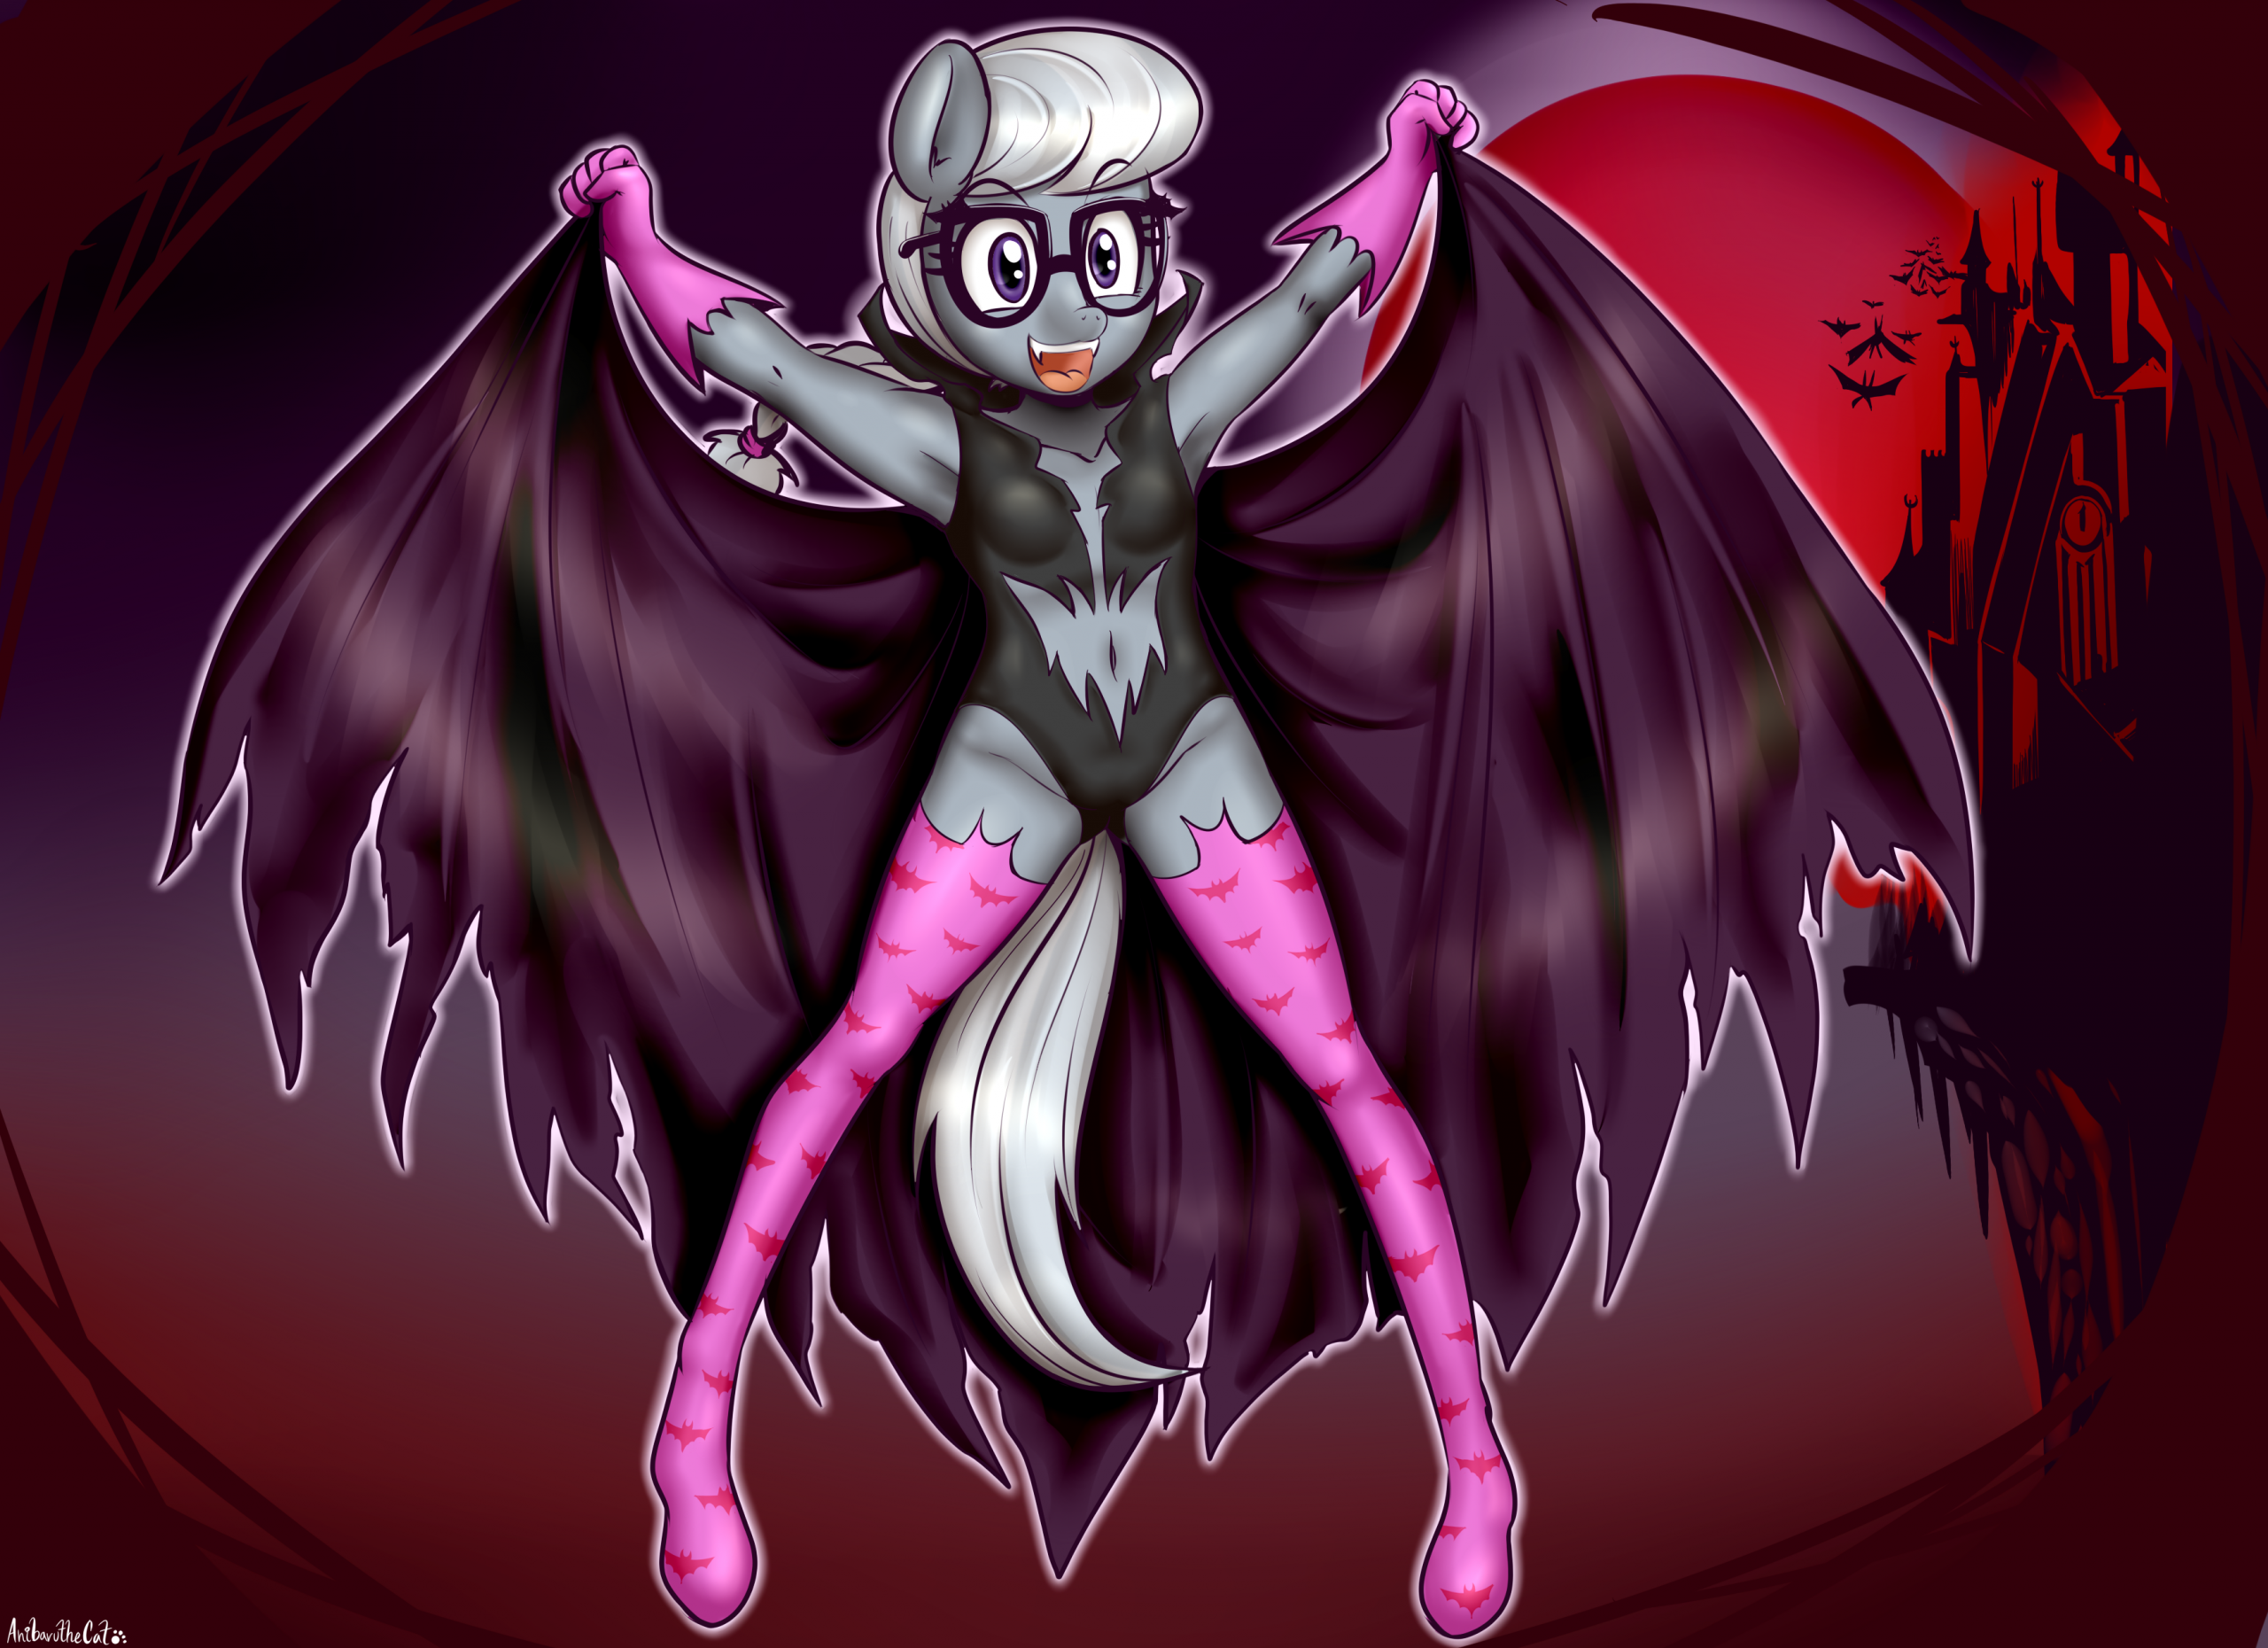 Spoopyfilly Art Pack porn comics Cosplay, Lolicon, Stockings